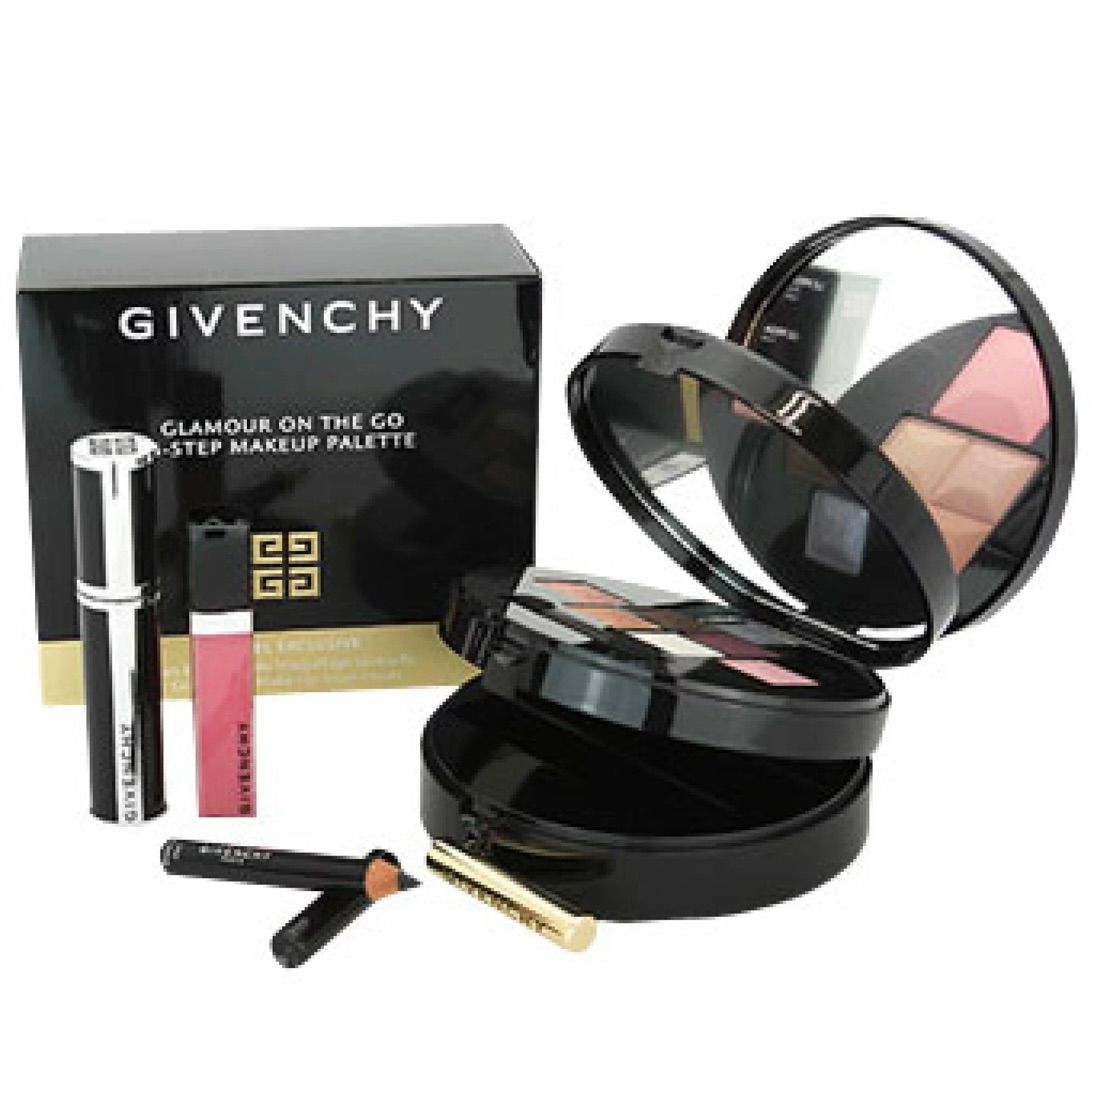 GIVENCHY メイクアップパレット